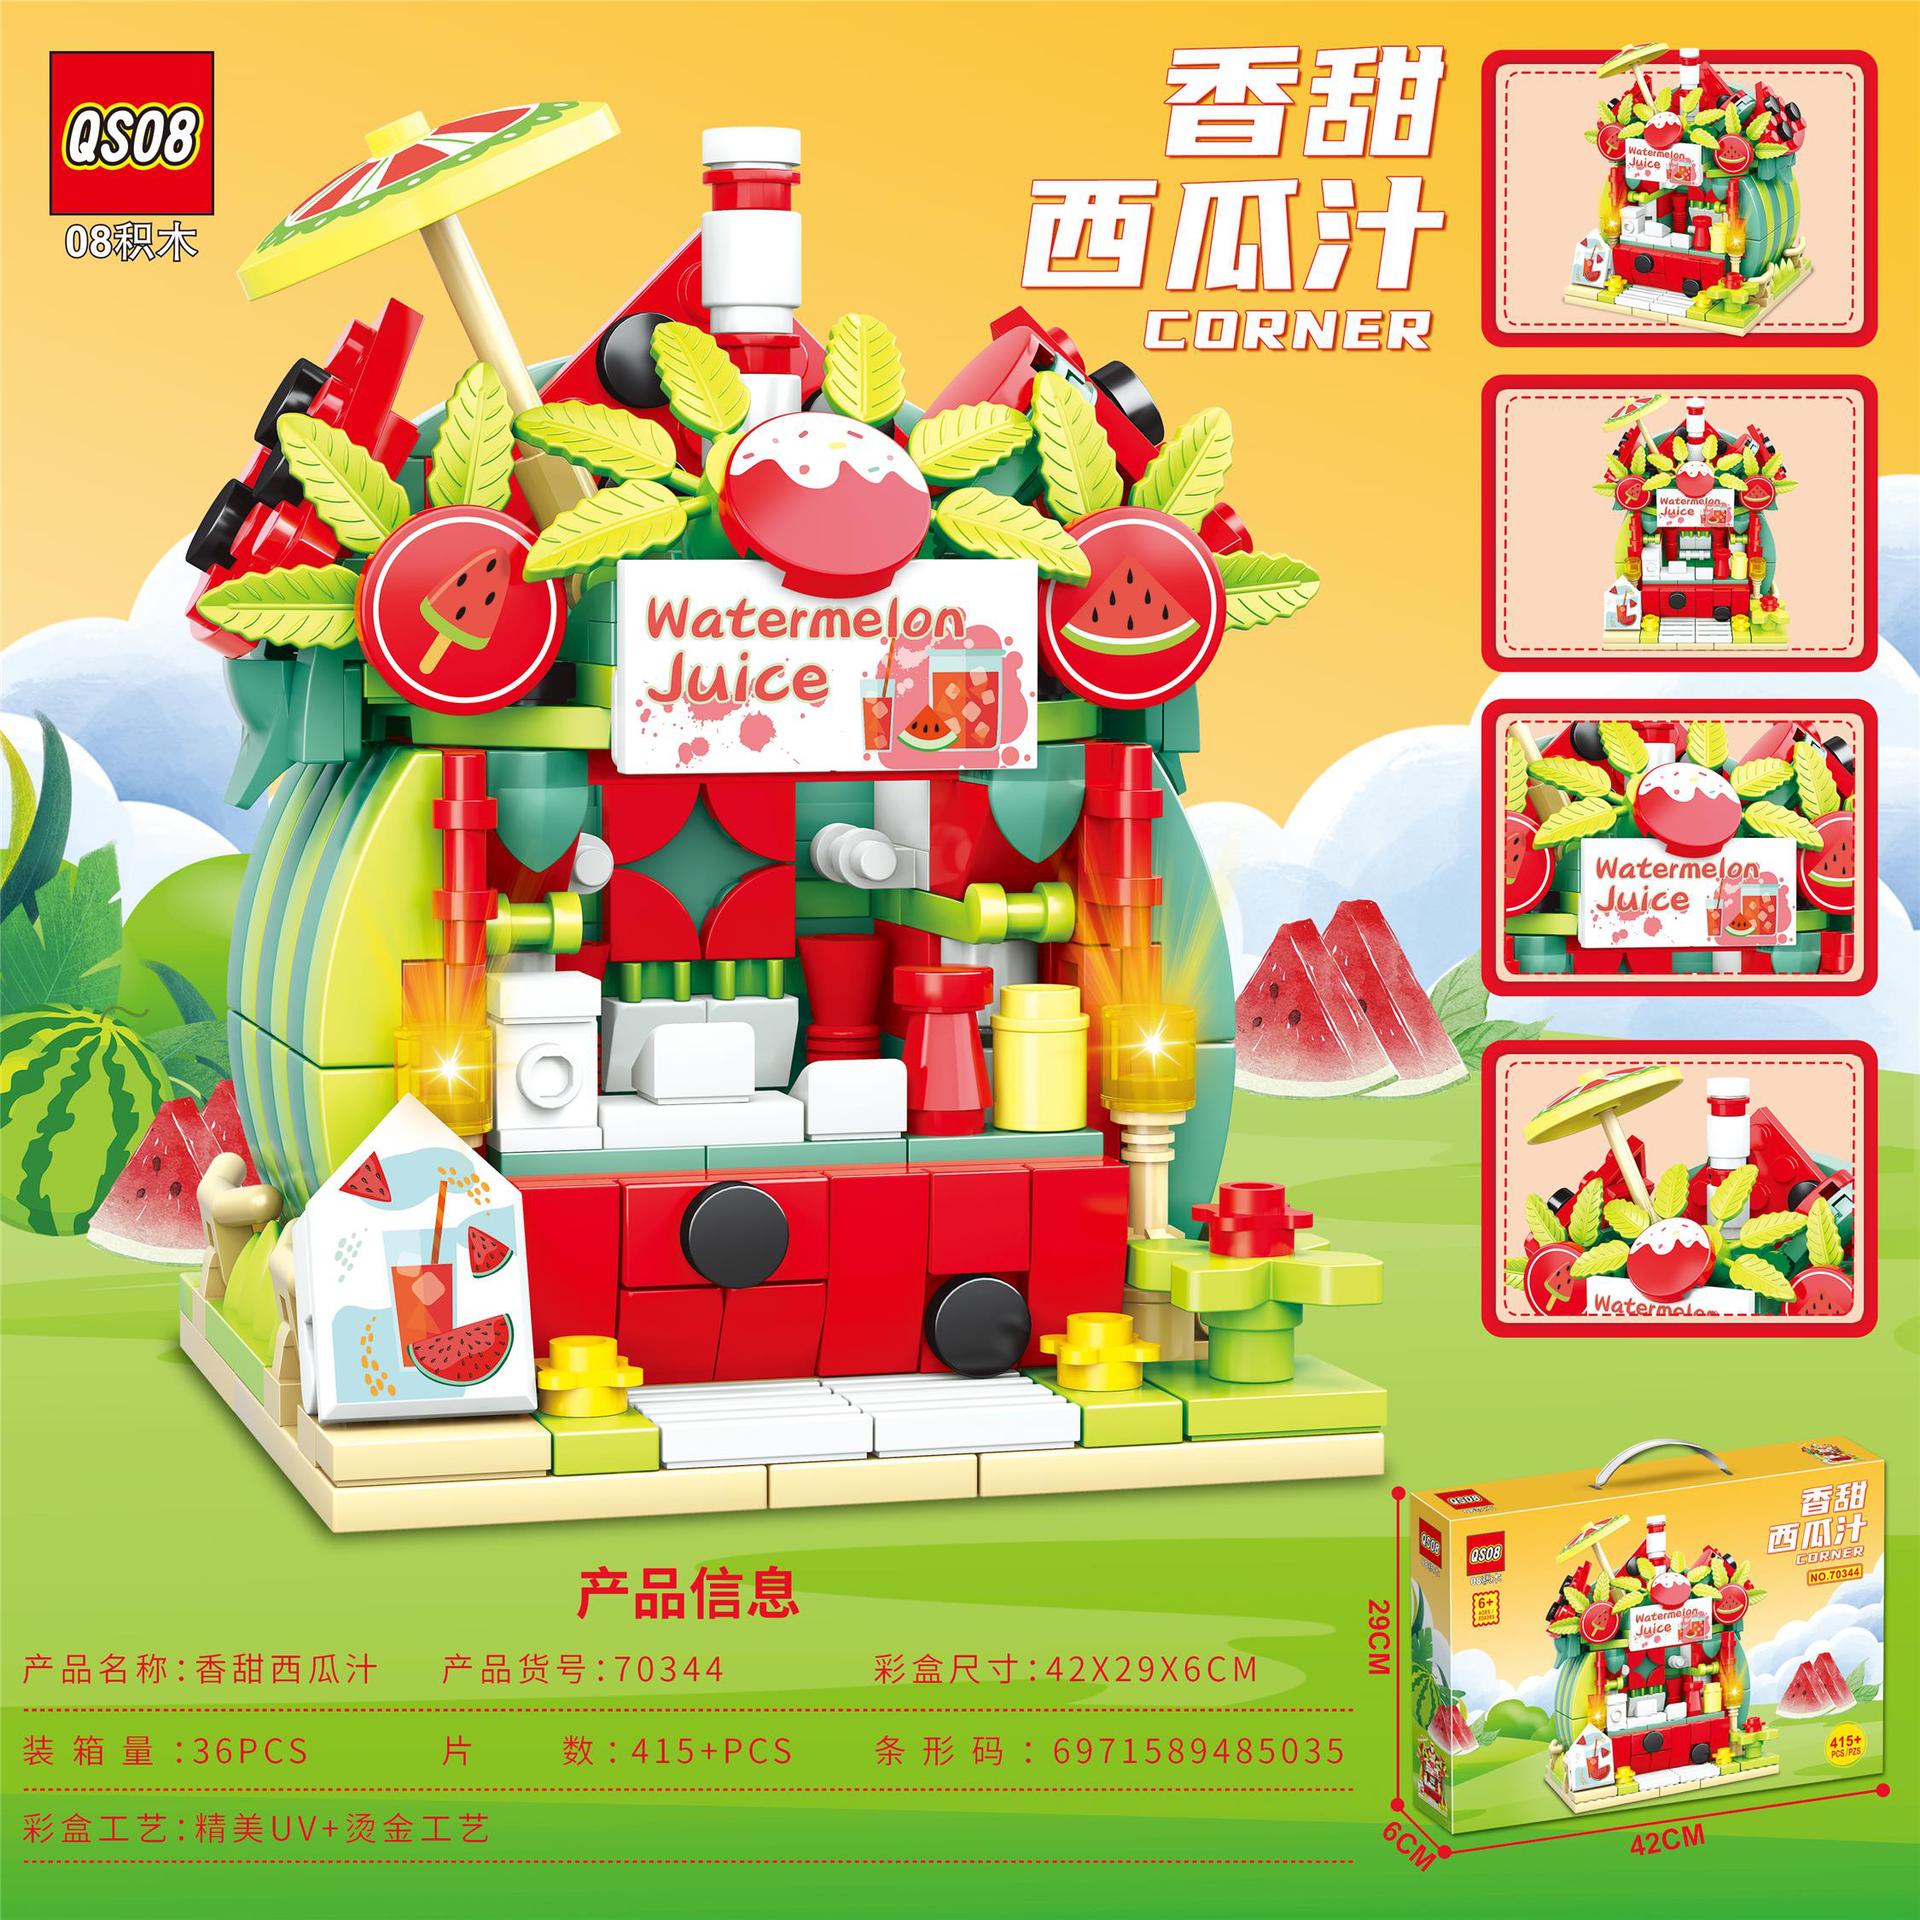 Institution Training Girls Large Gift Box Puzzle Building Blocks Small Particle Assembly Compatible with Lego Building Blocks Children's Toys Wholesale